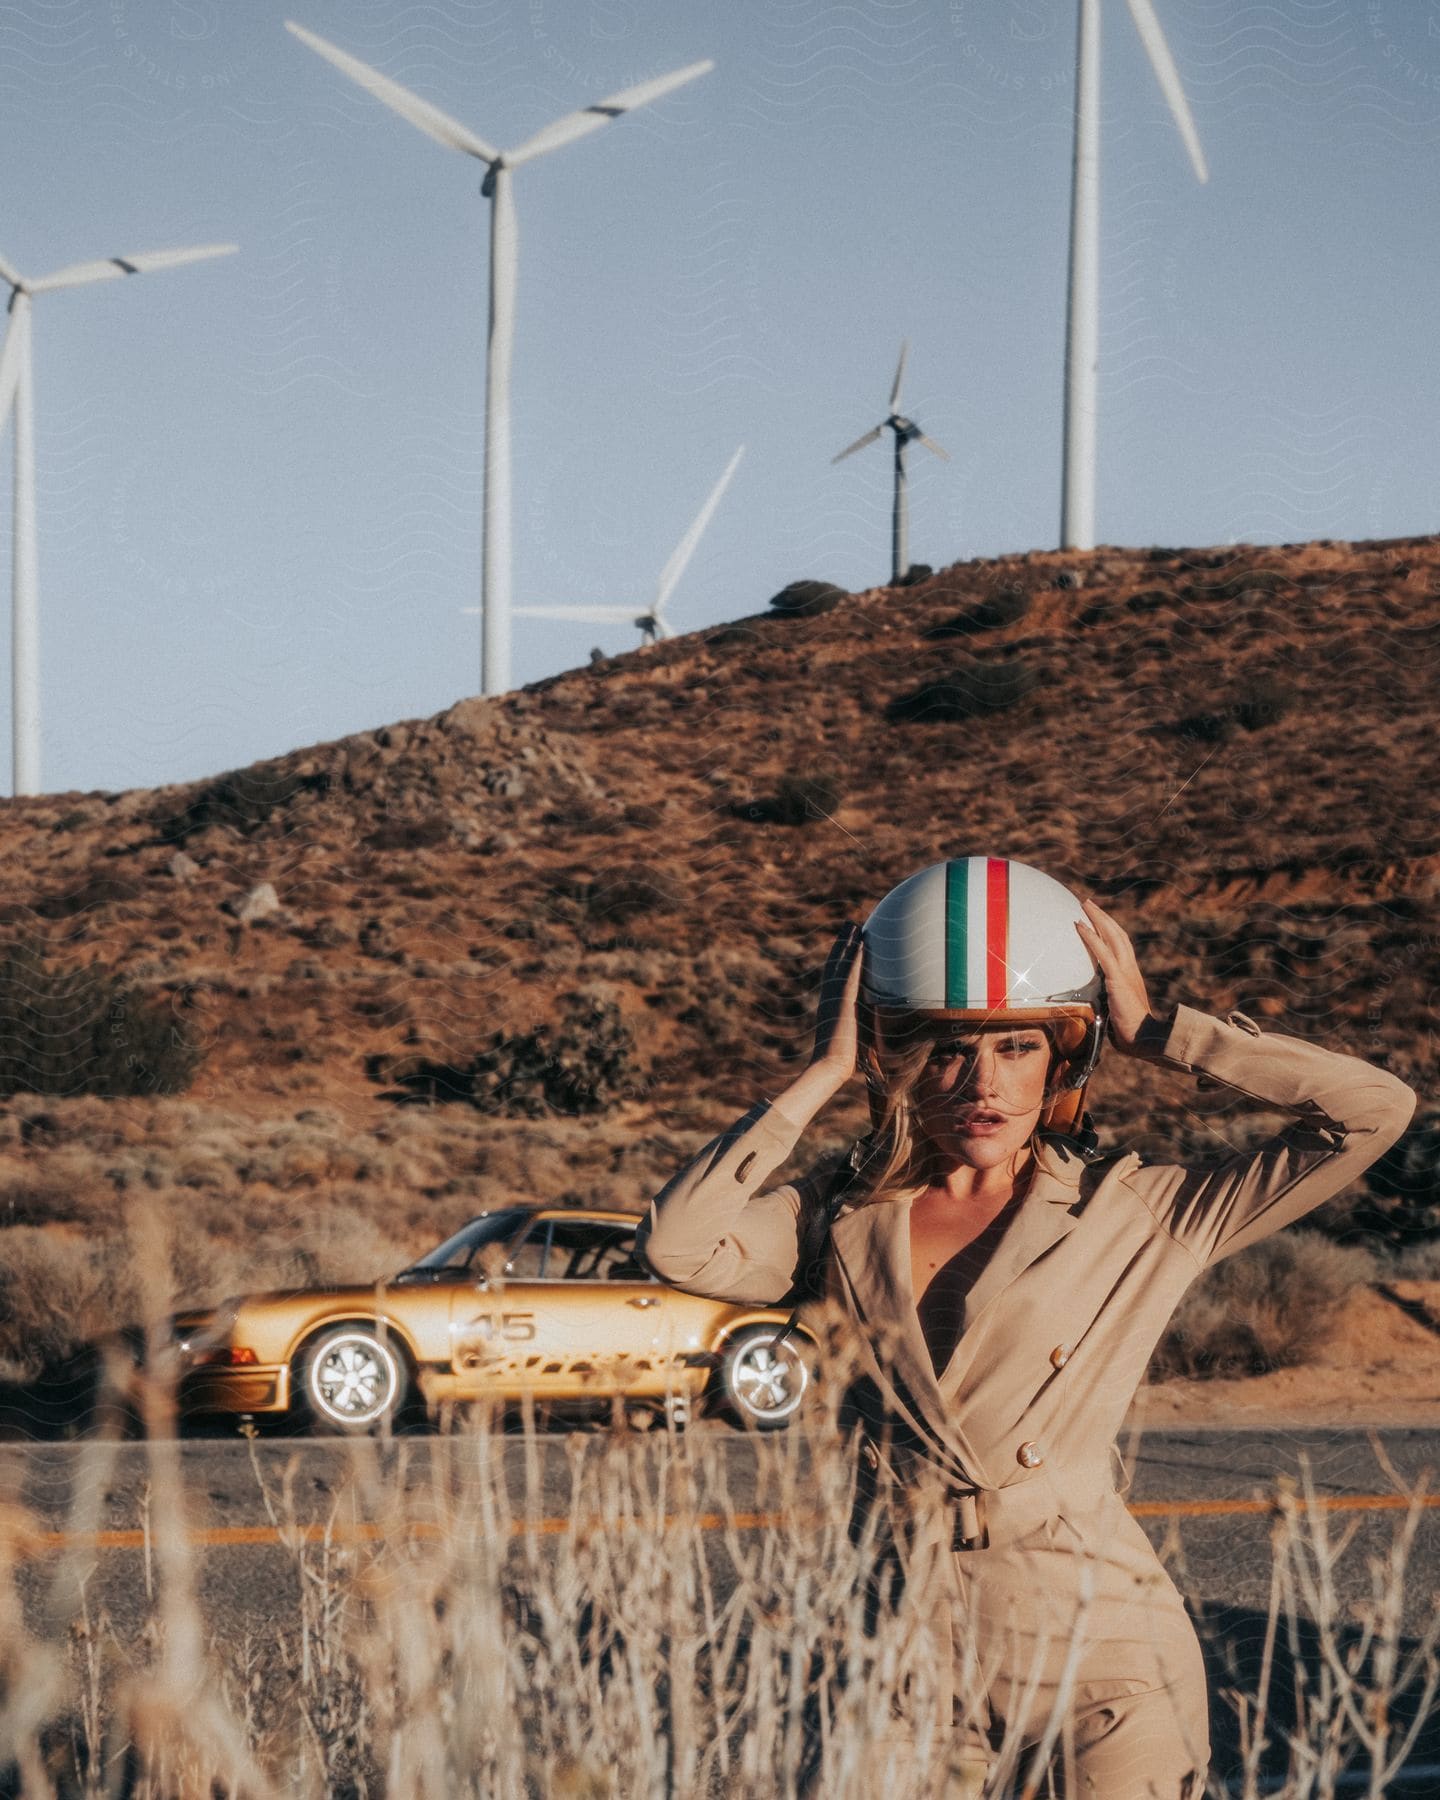 A woman wearing a helmet and racing outfit posing in front of a car